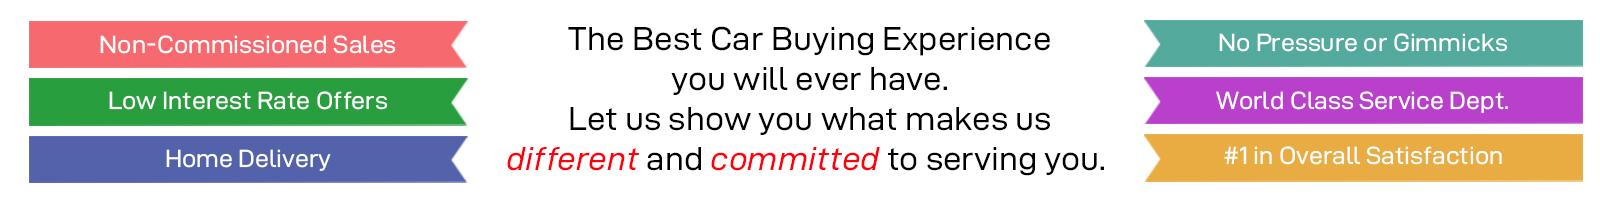 Best Car Buying Experience